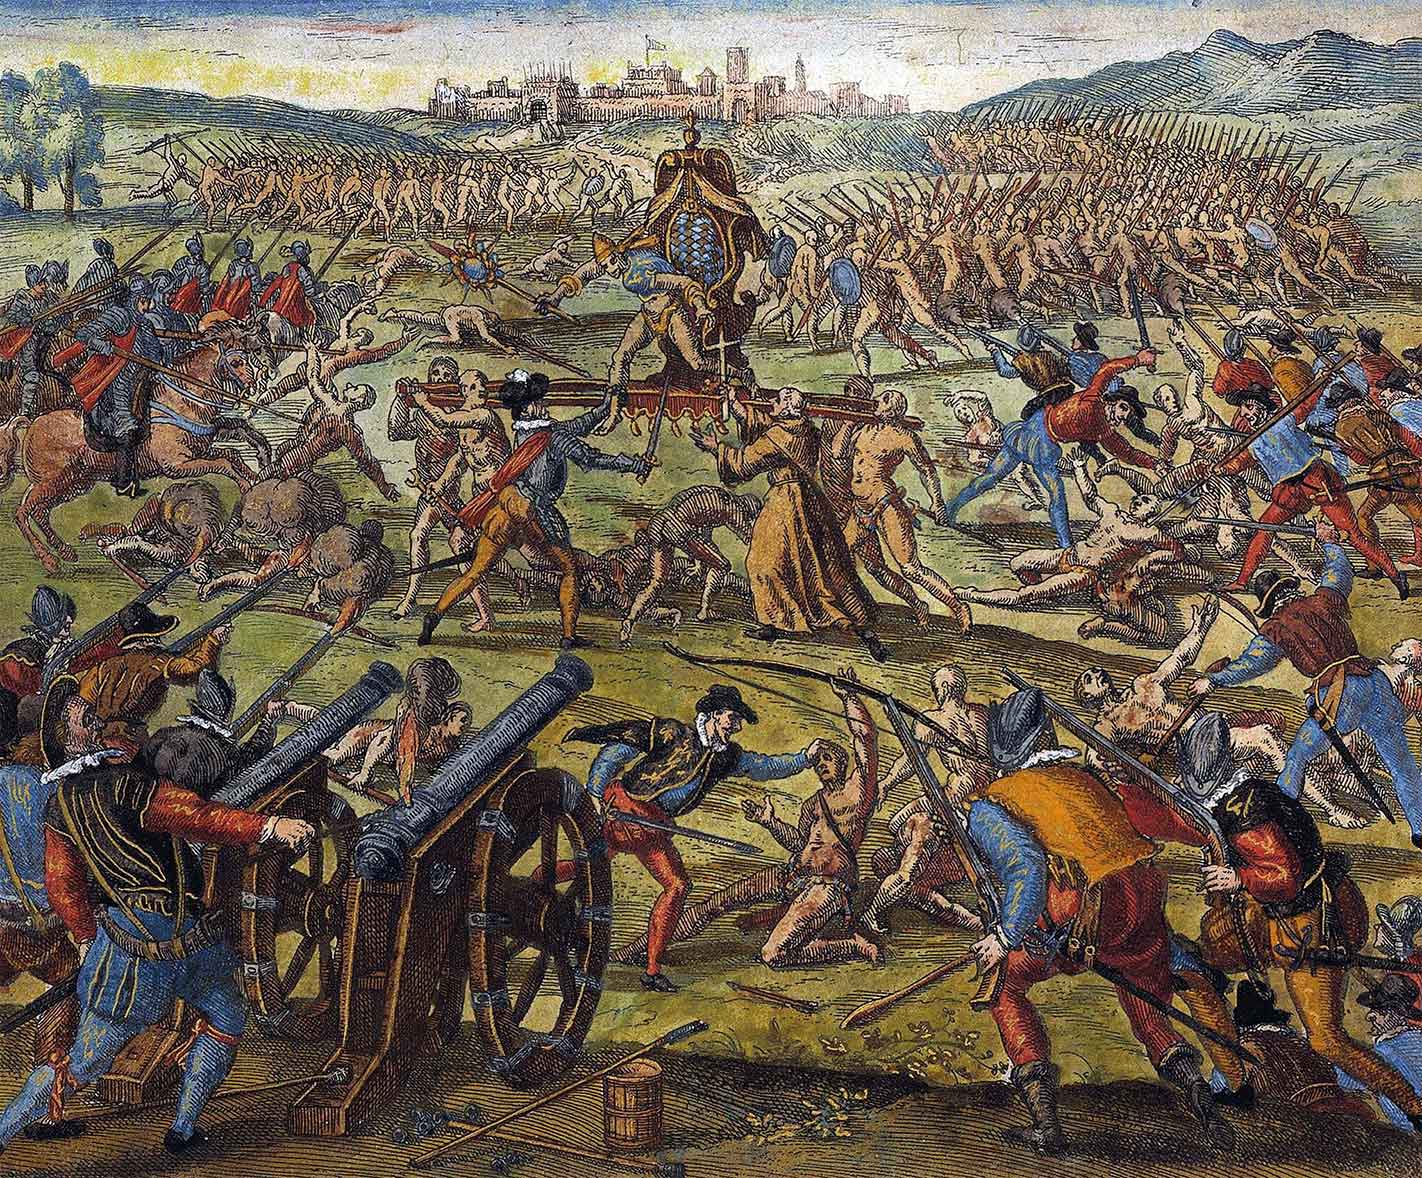 ARREST OF ATAHUALPA, Stay Curioussis